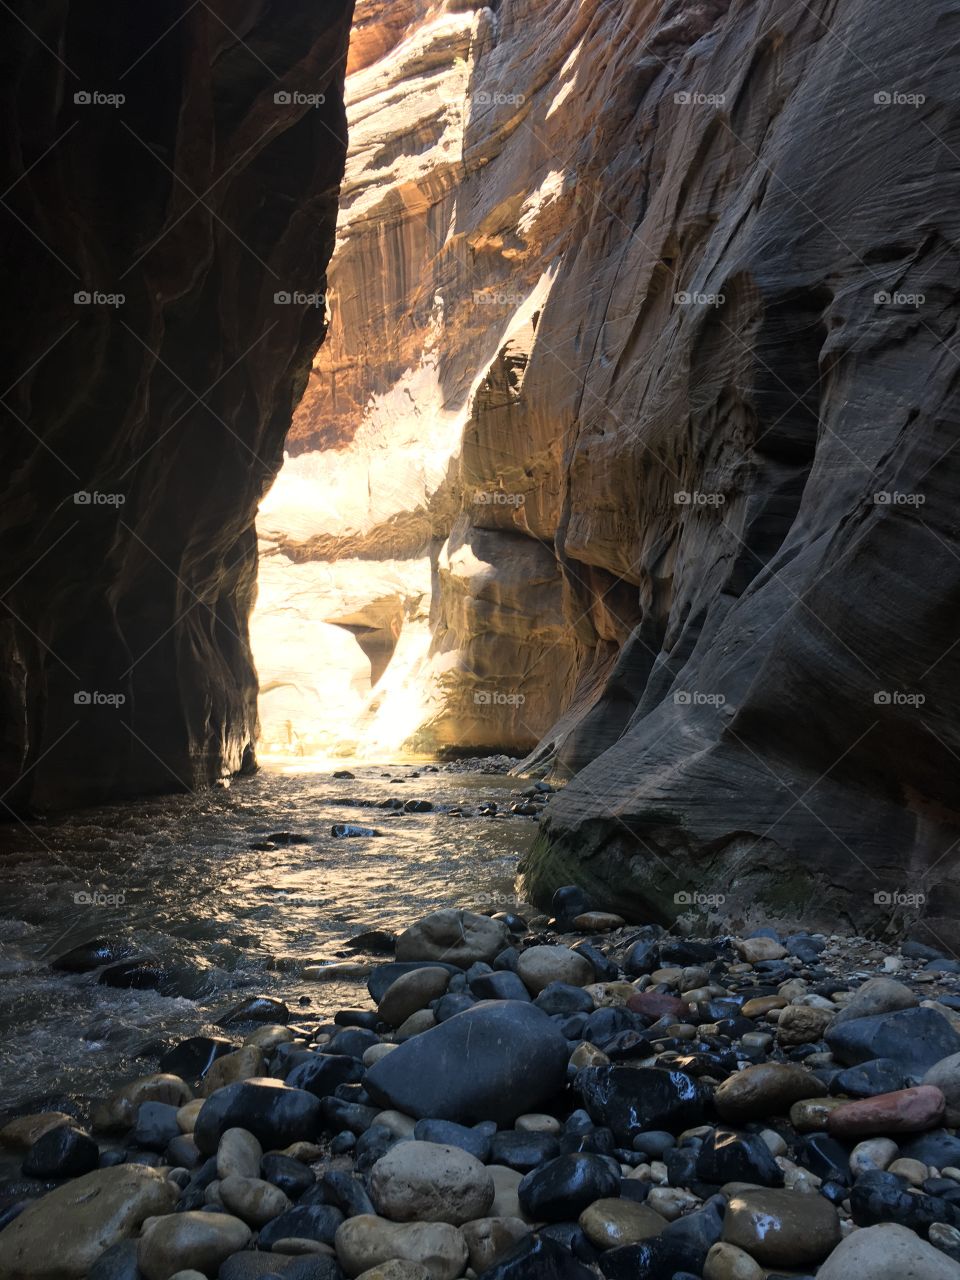 The Virgin River flowing steadily across pebbles though narrow canyon walls in the Narrows in Zion National Park 